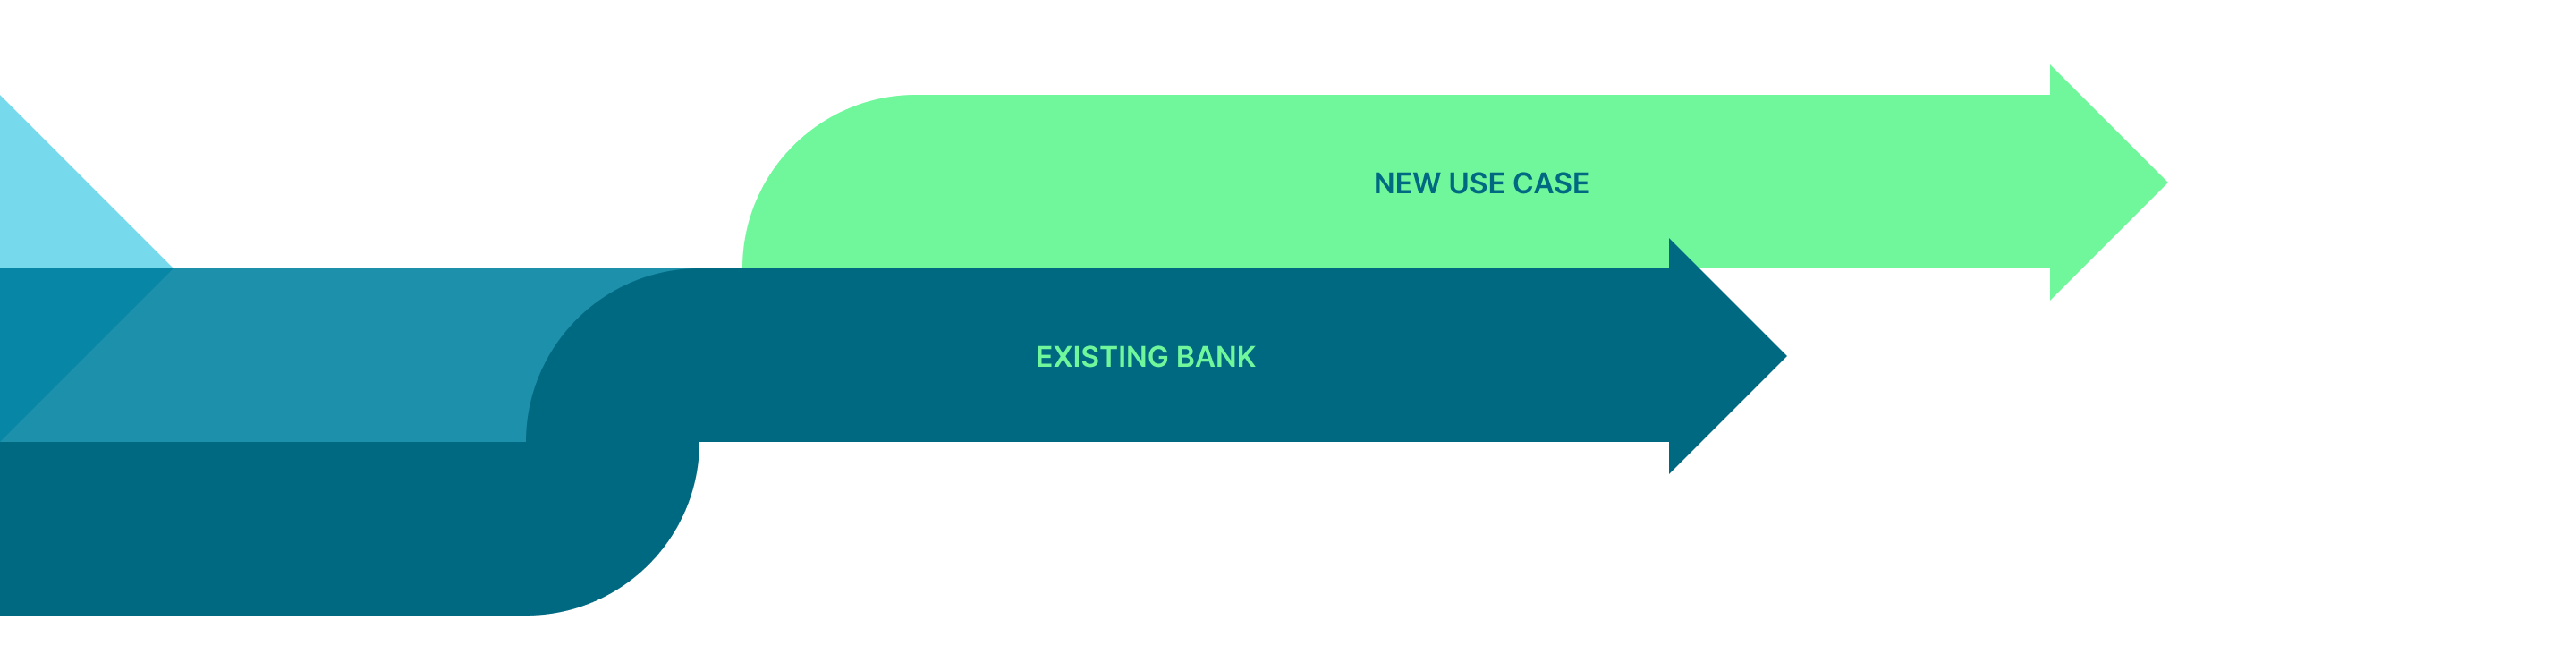 Existing bank - new use case